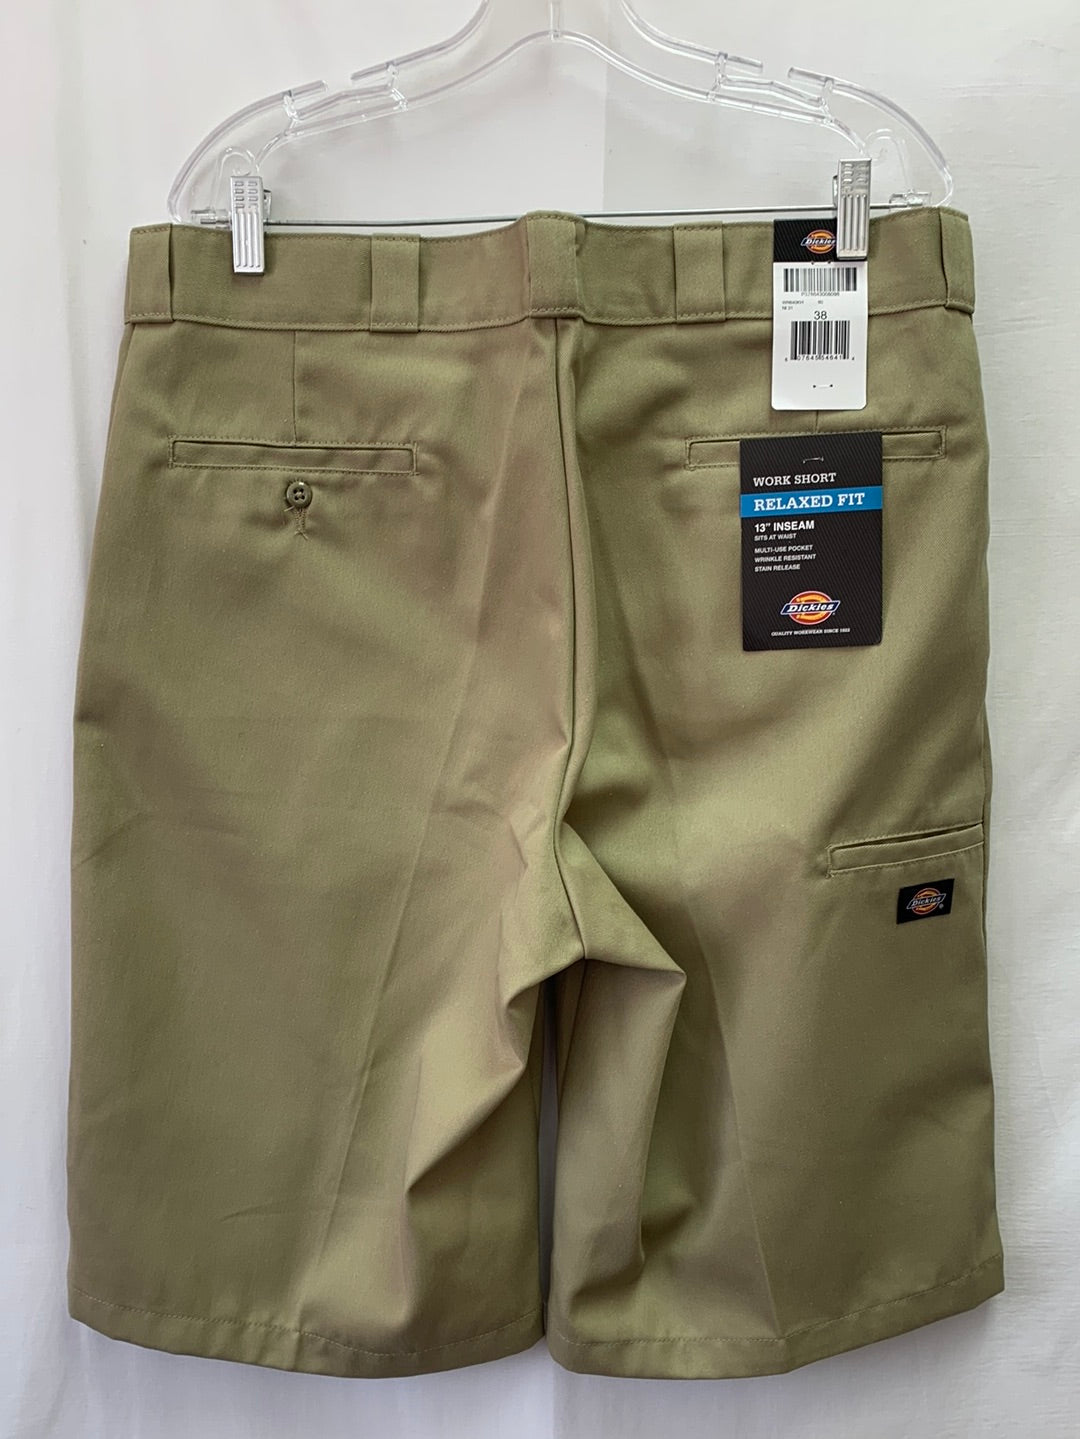 NWT - DICKIES khaki Relaxed Fit 13" Inseam Work Shorts - 38